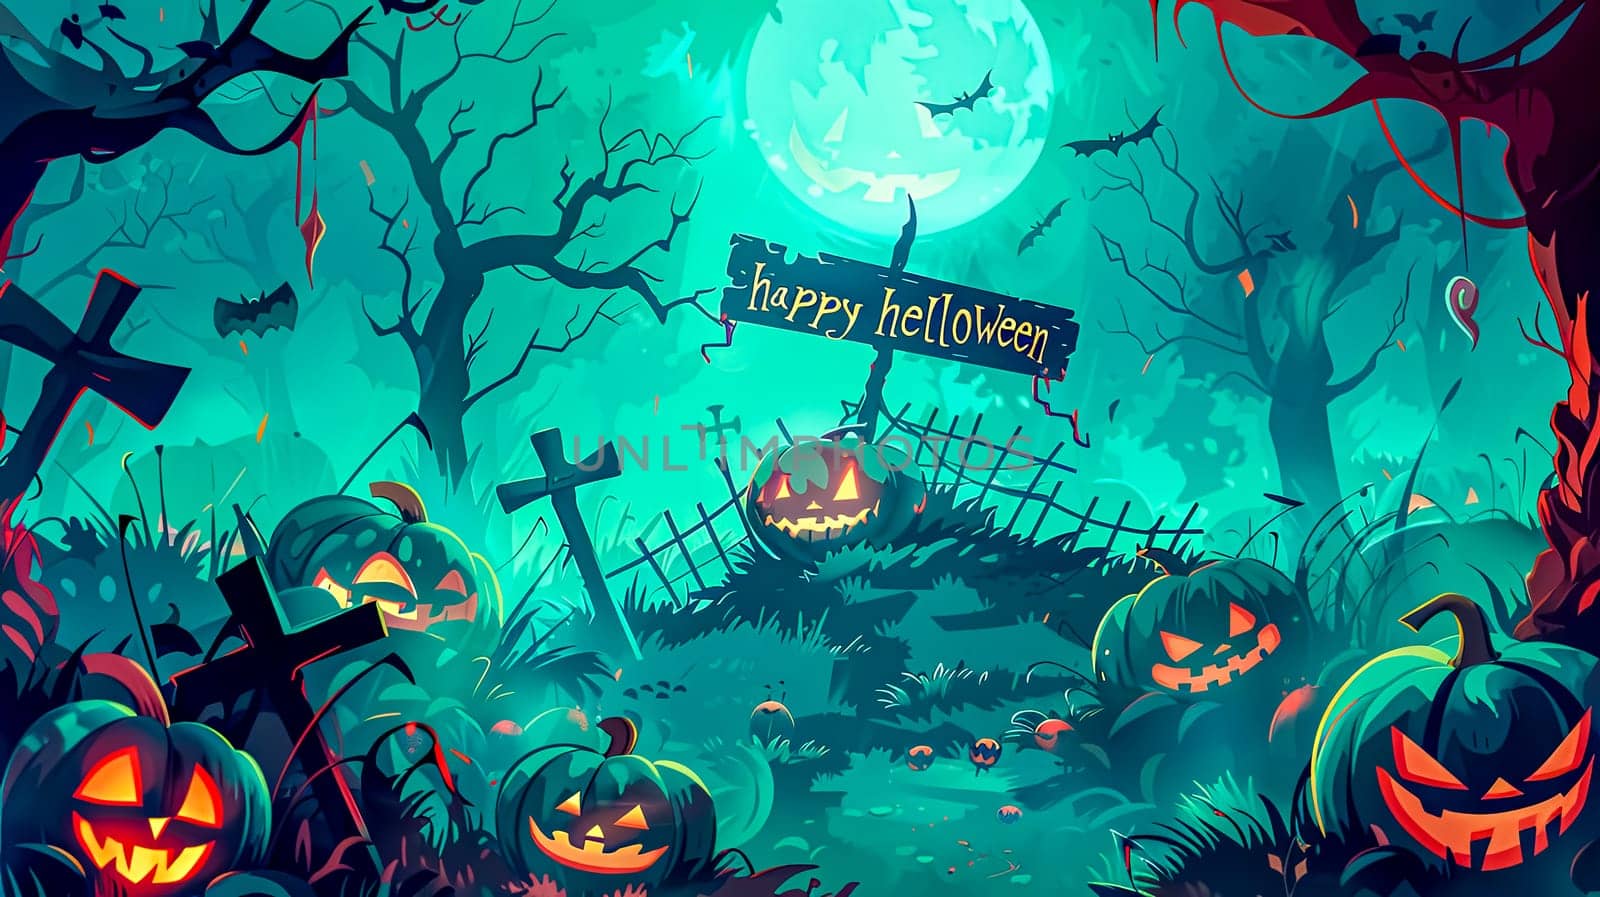 An enchanted halloween night scene with spooky forest. Jack o' lanterns. Full moon. And happy signs. Illustration of a vibrant and colorful cartoon haunted fantasy with eerie and creepy pumpkins